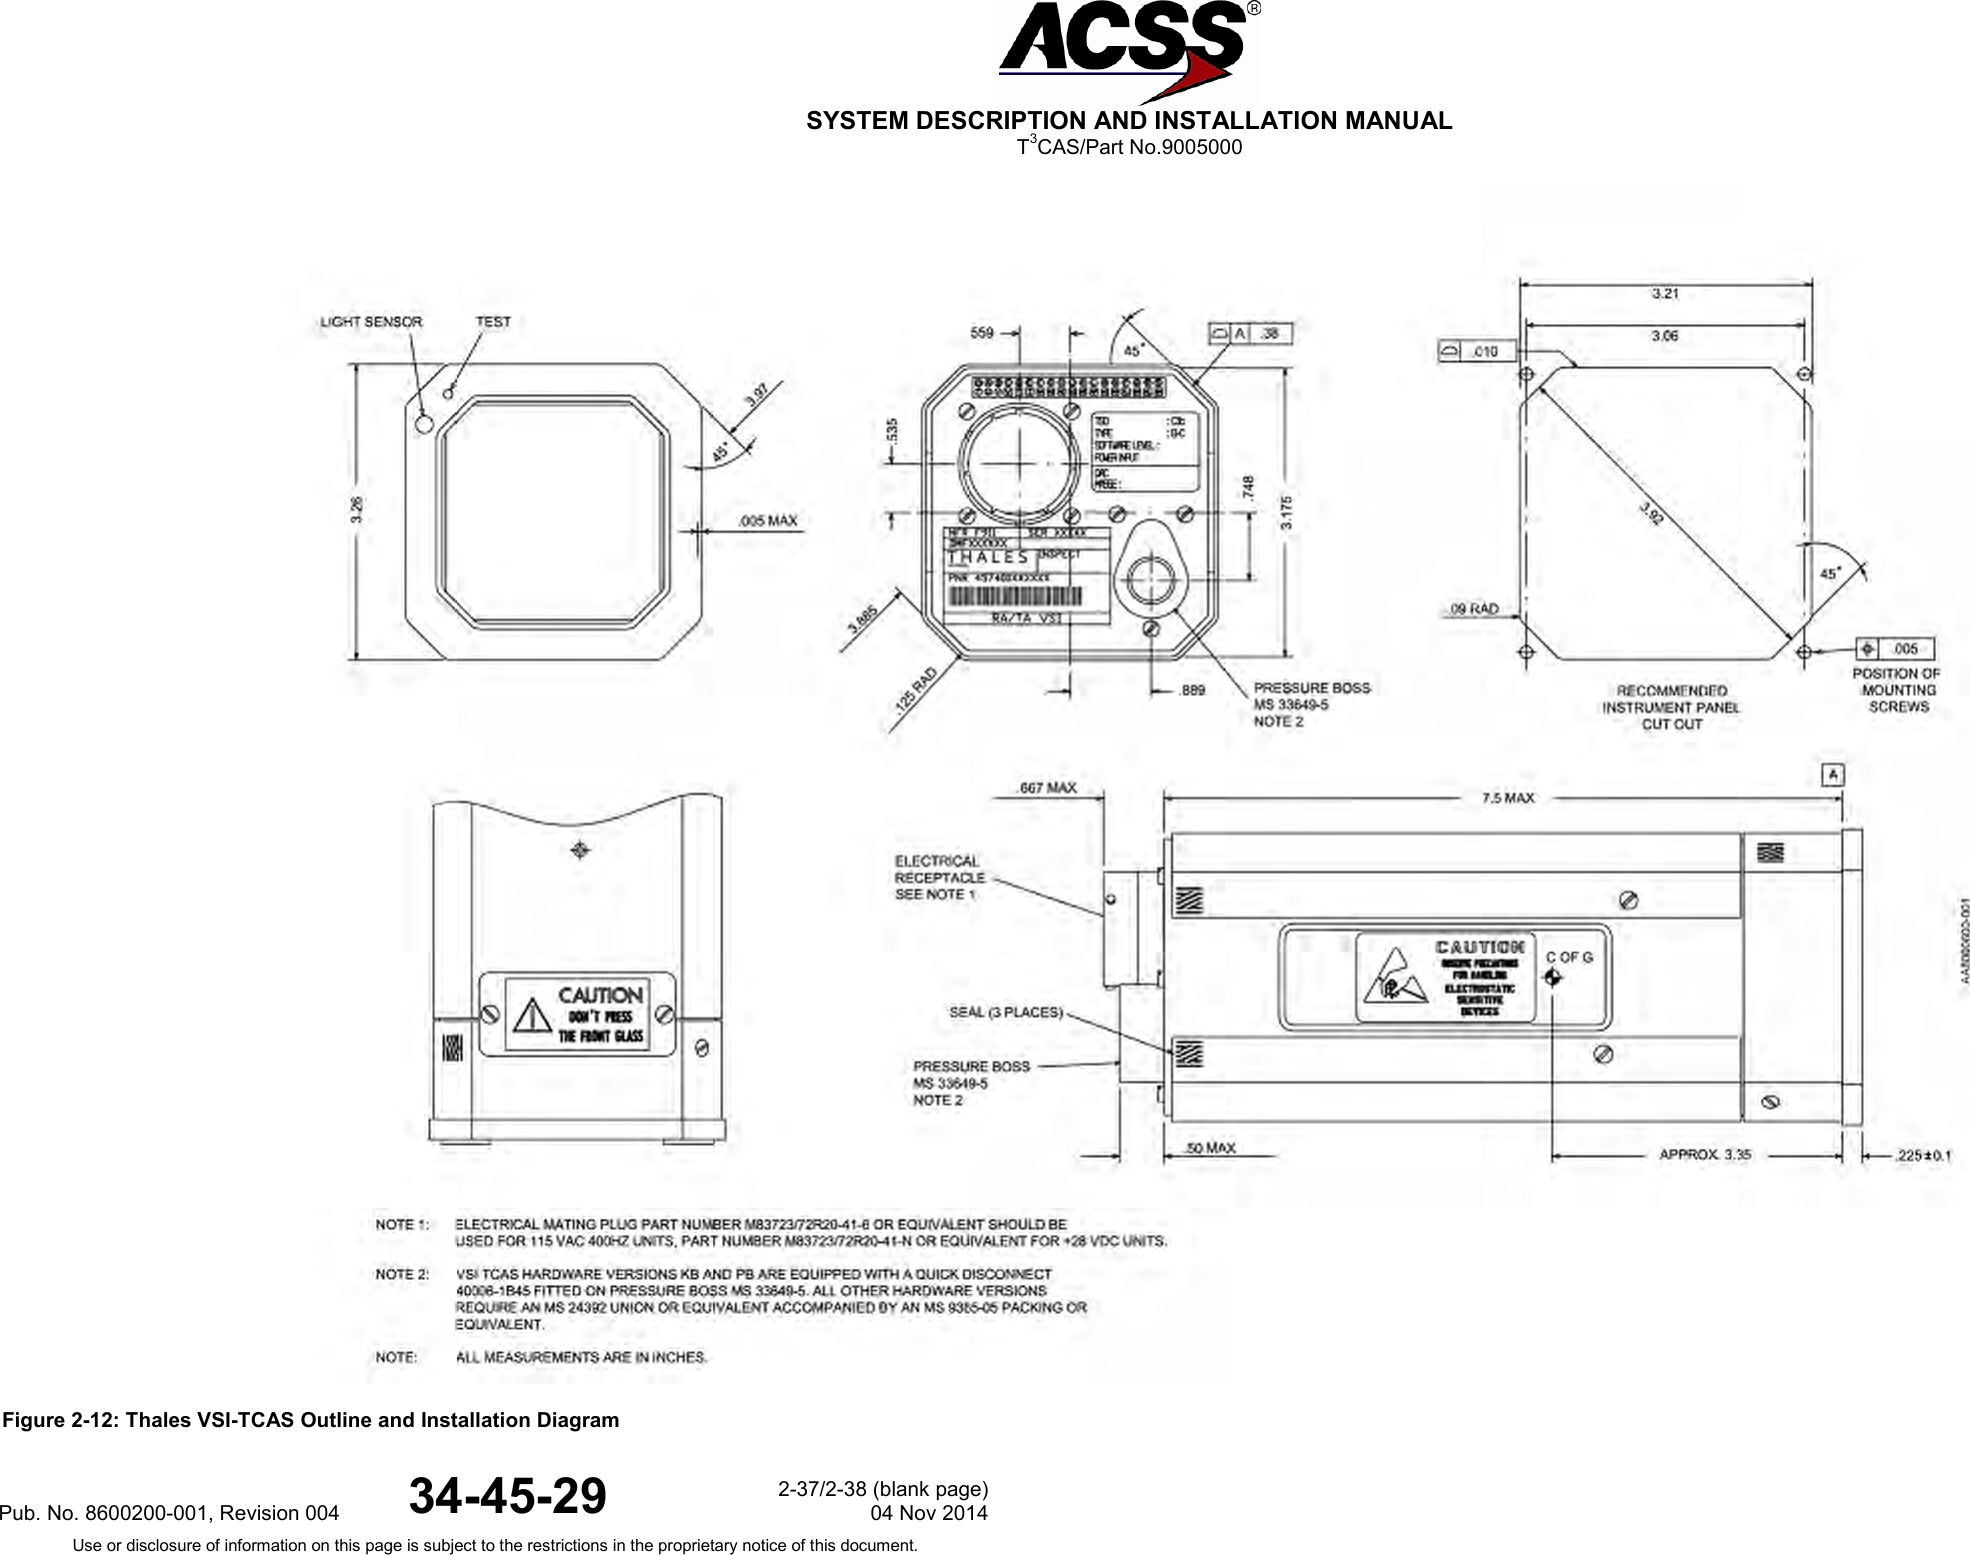  SYSTEM DESCRIPTION AND INSTALLATION MANUAL T3CAS/Part No.9005000  Figure 2-12: Thales VSI-TCAS Outline and Installation DiagramPub. No. 8600200-001, Revision 004 34-45-29 2-37/2-38 (blank page) 04 Nov 2014 Use or disclosure of information on this page is subject to the restrictions in the proprietary notice of this document.  